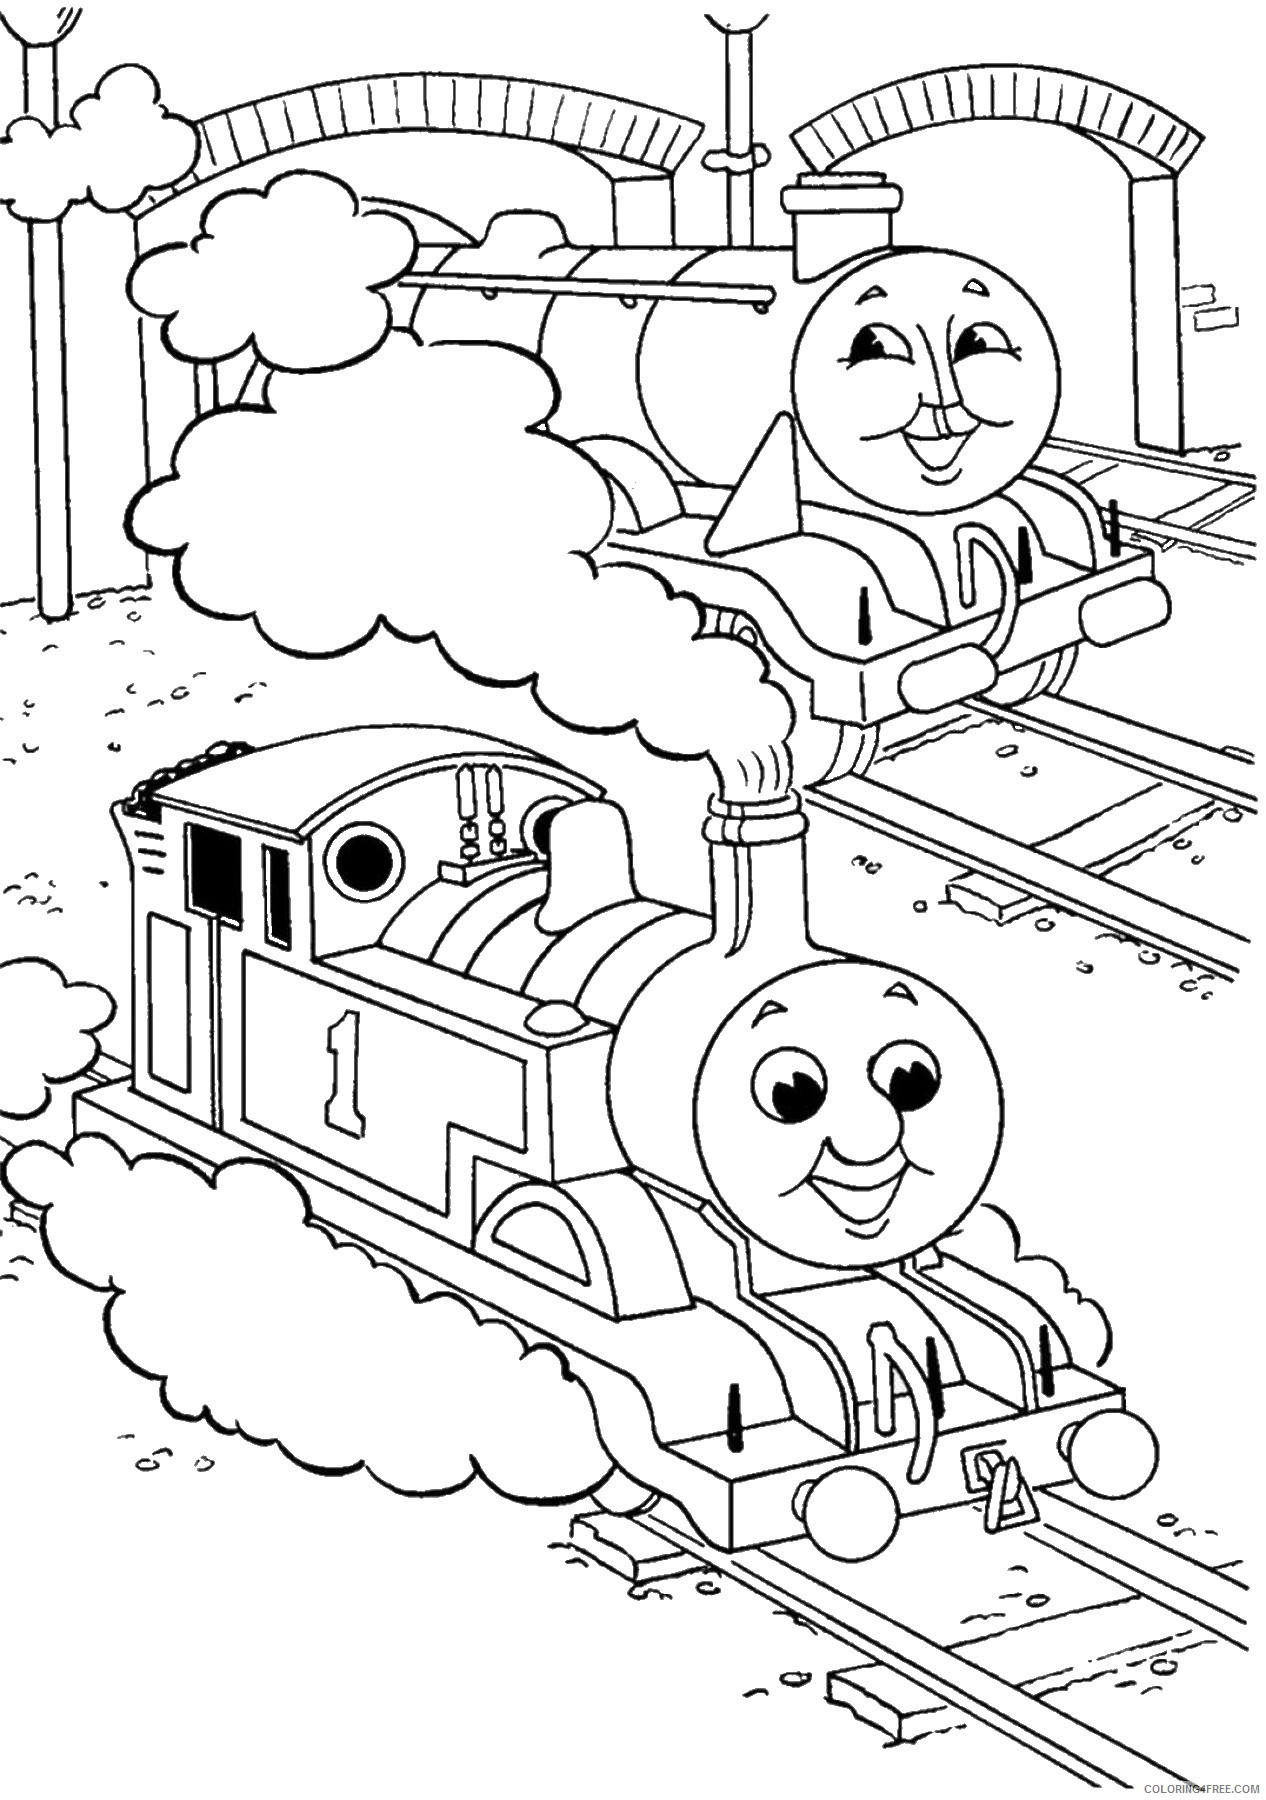 Thomas and Friends Coloring Pages Cartoons thomas_tank_engine_cl06 Printable 2020 6519 Coloring4free